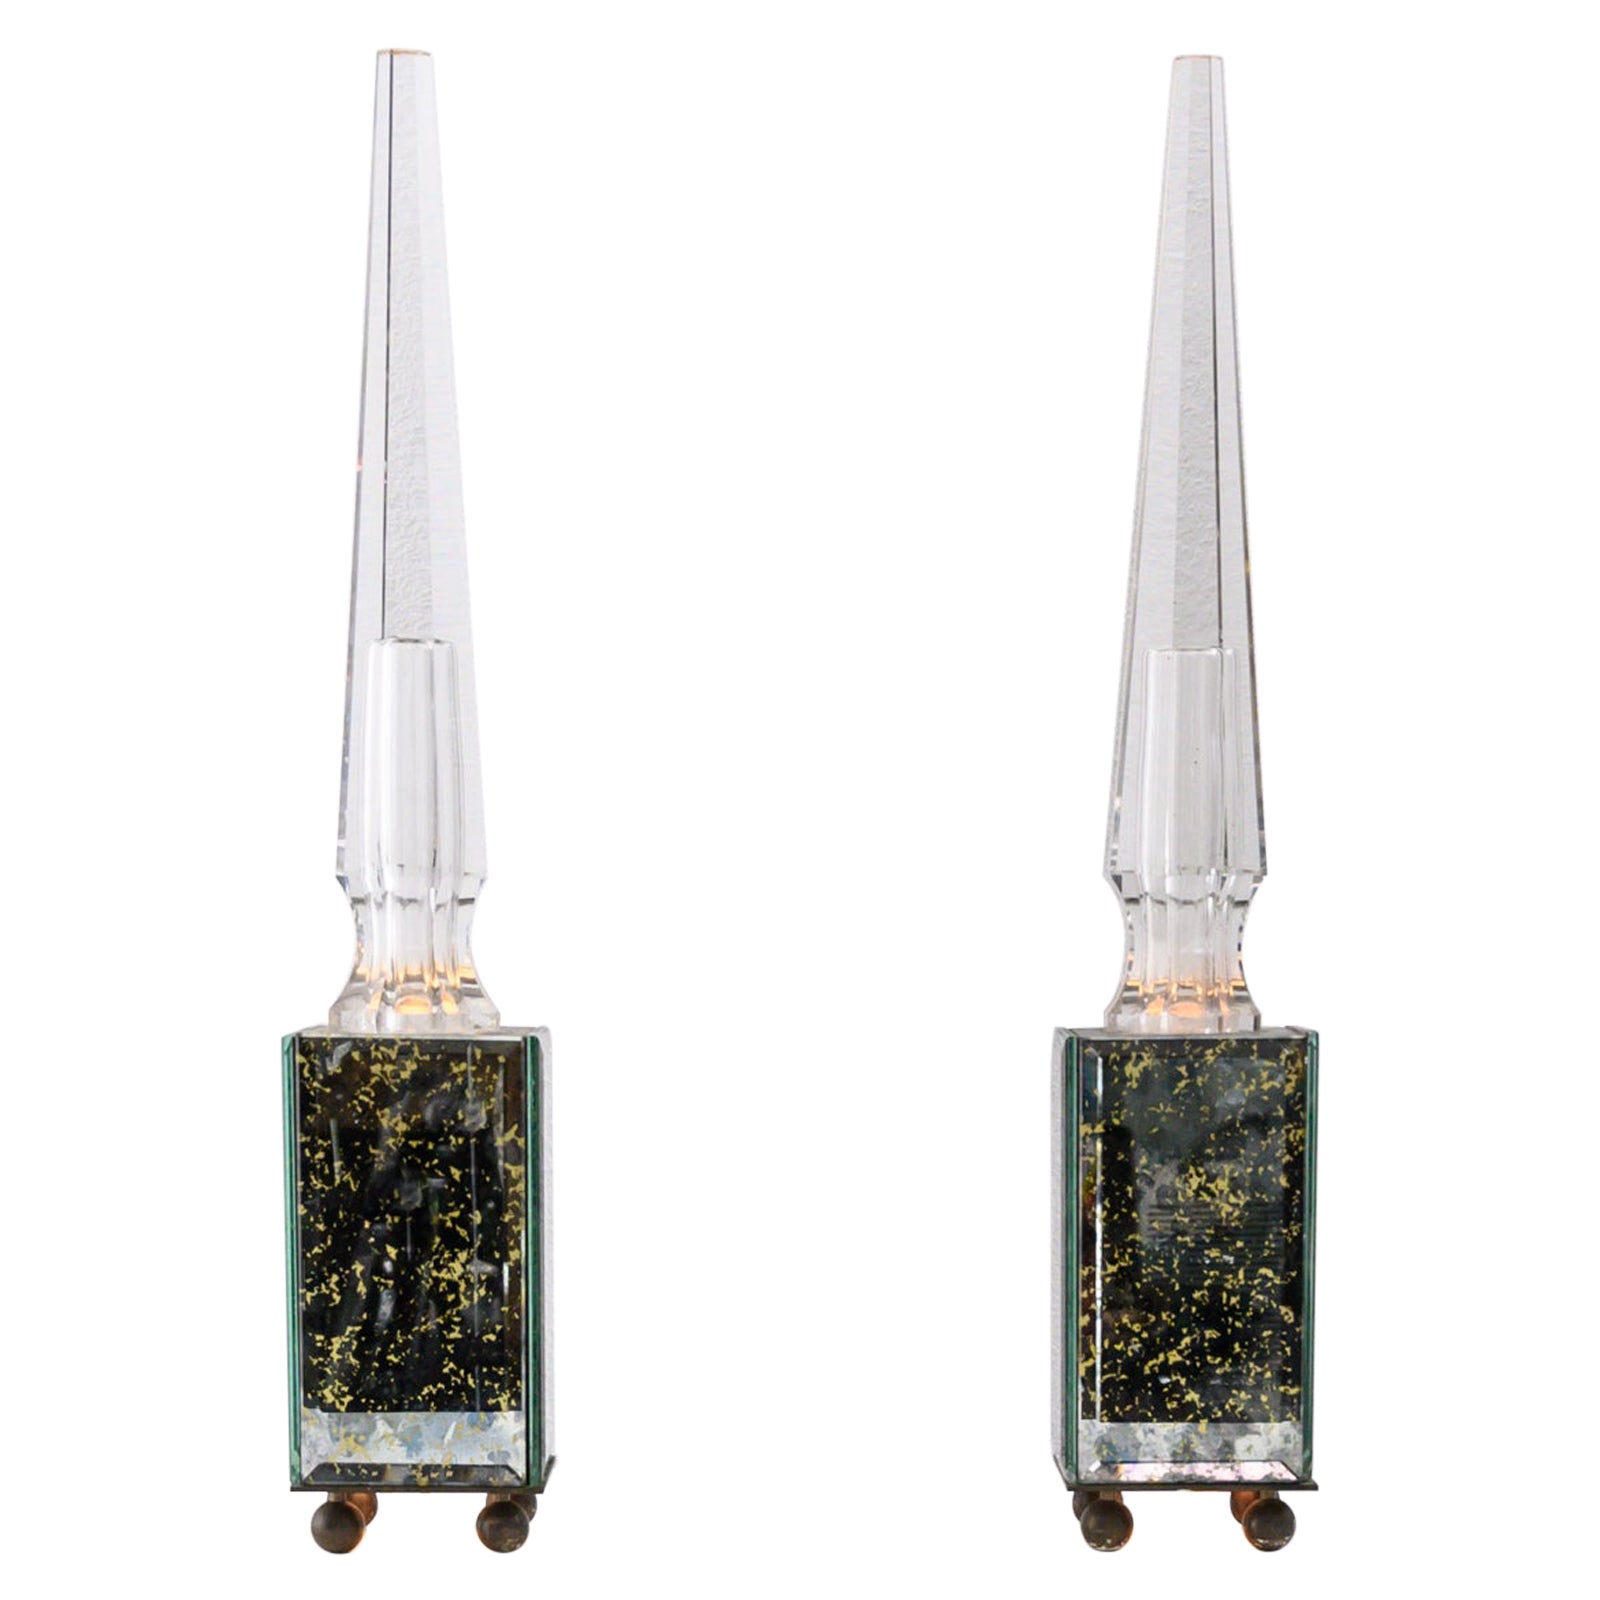 Pair of Obelisk Lamps in the Style of Serge Roche, France circa 1940